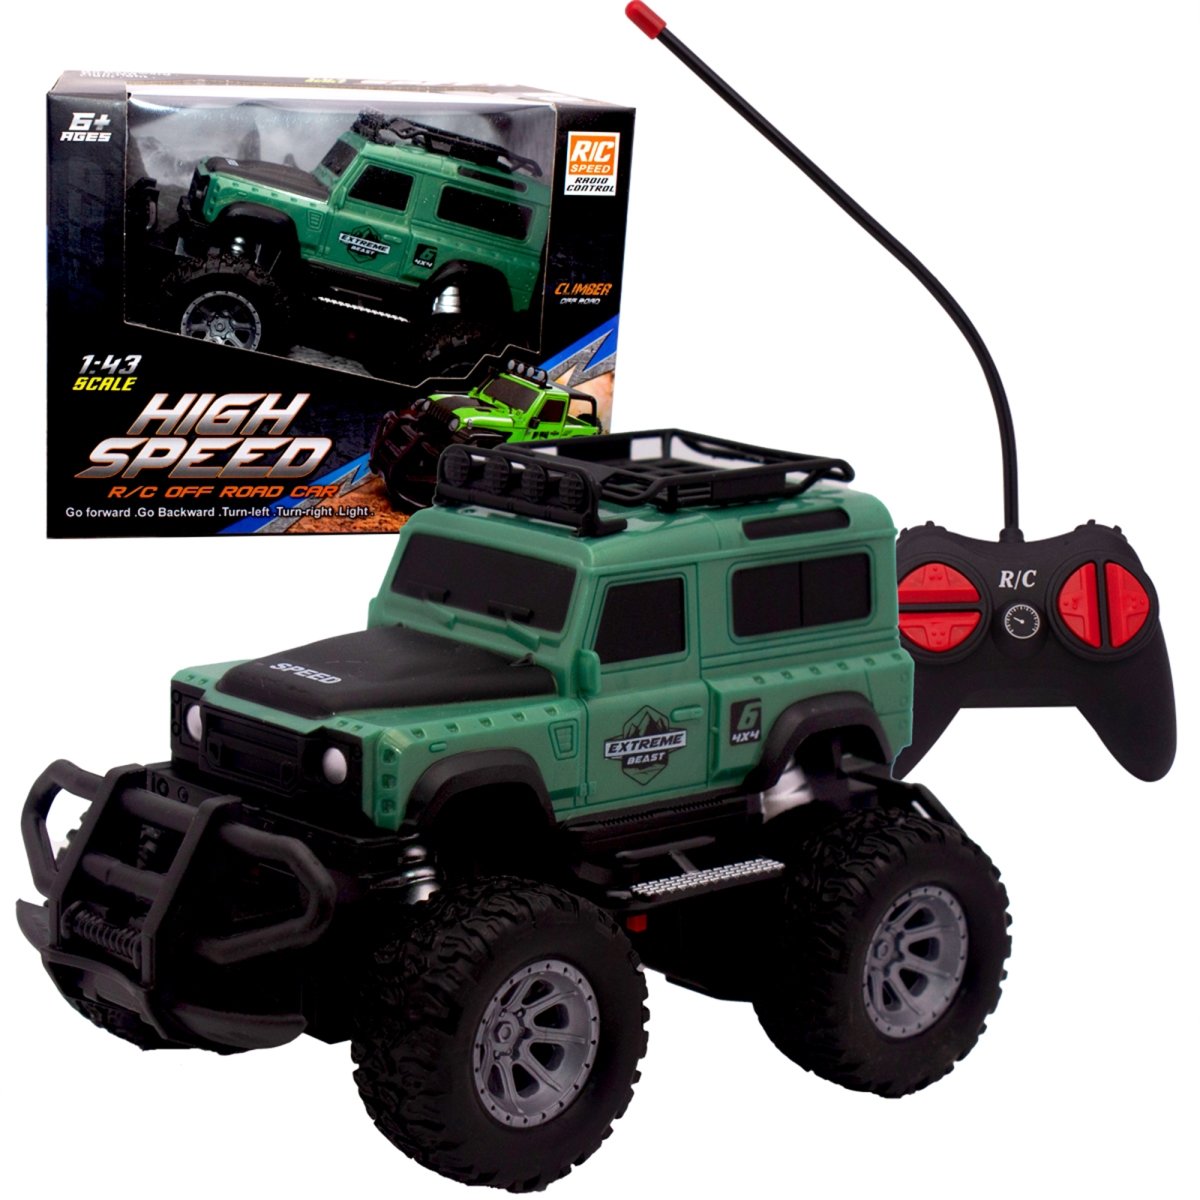 Picture of Zummy FS1158RE Zummy Remote Control Off-Road Style SUV Toy